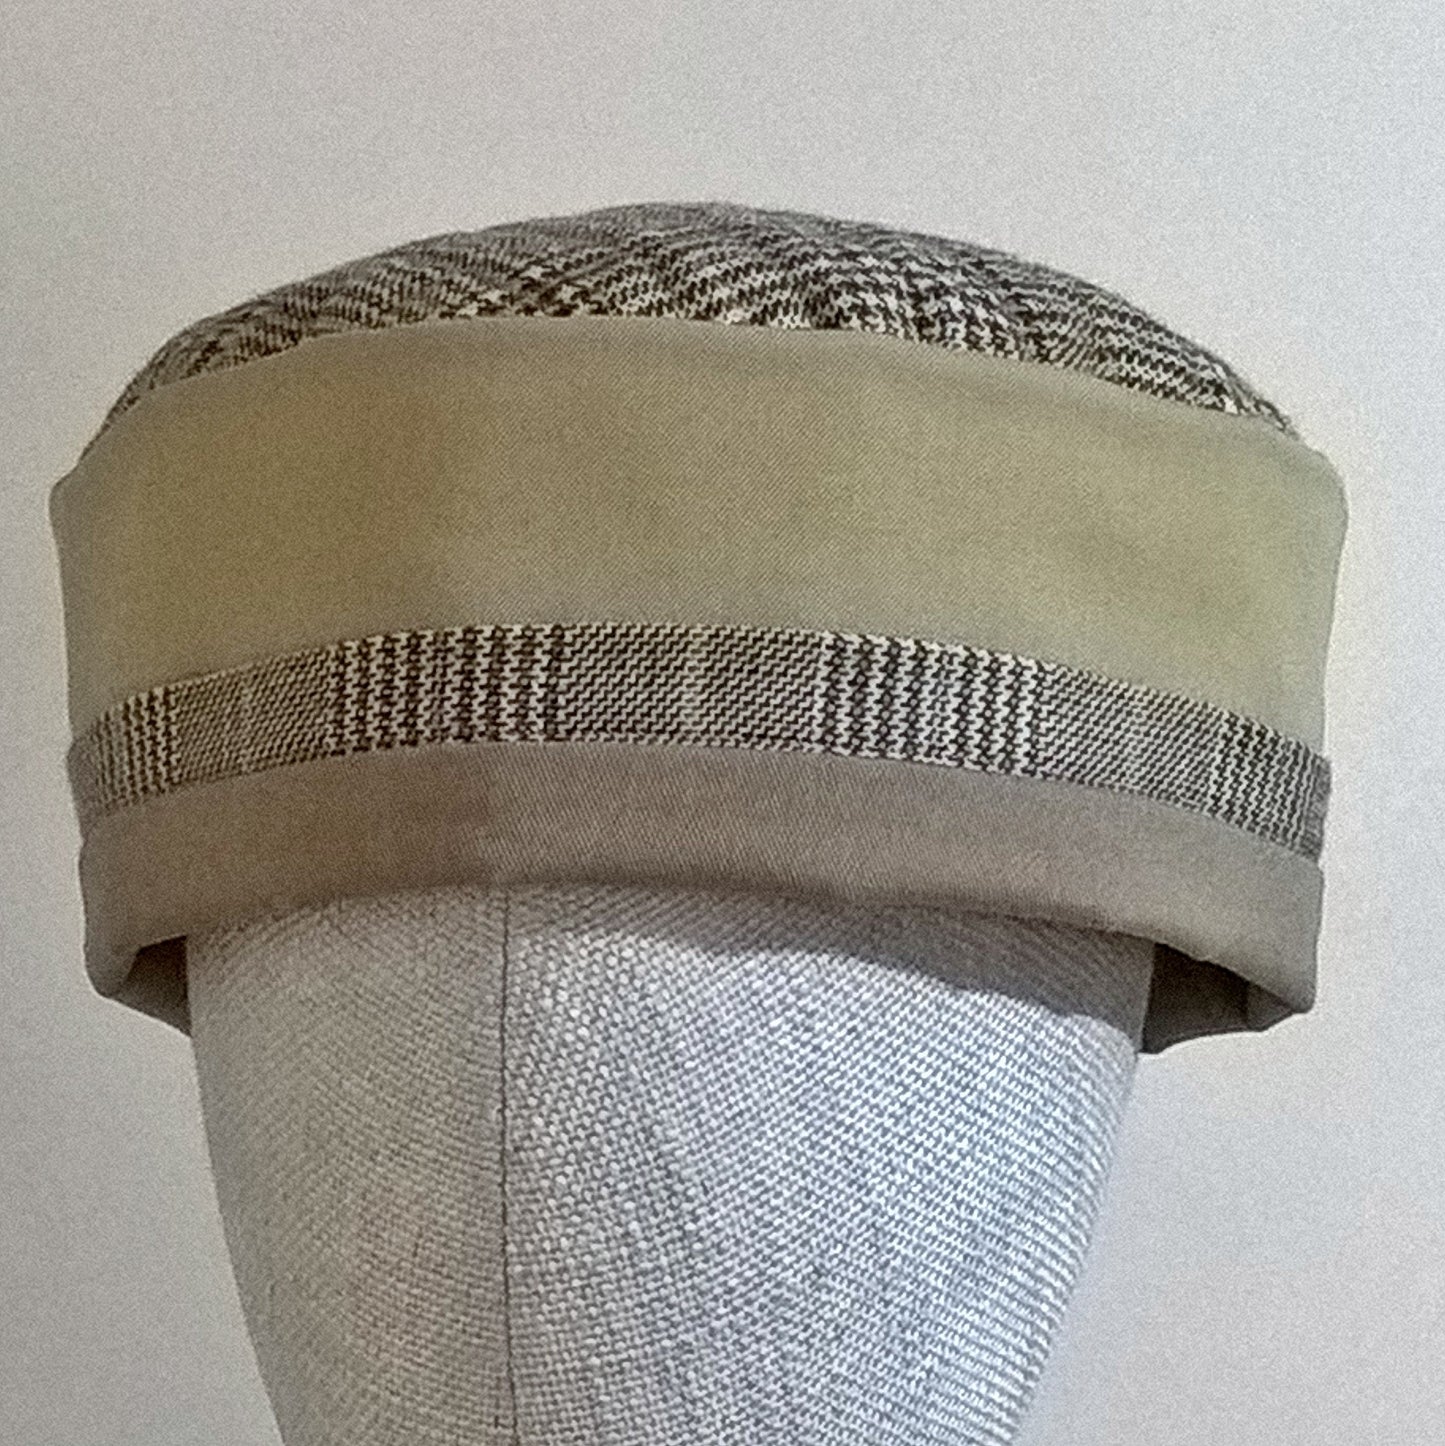 All natural fibre smoking cap handmade in tweed, mustard and taupe